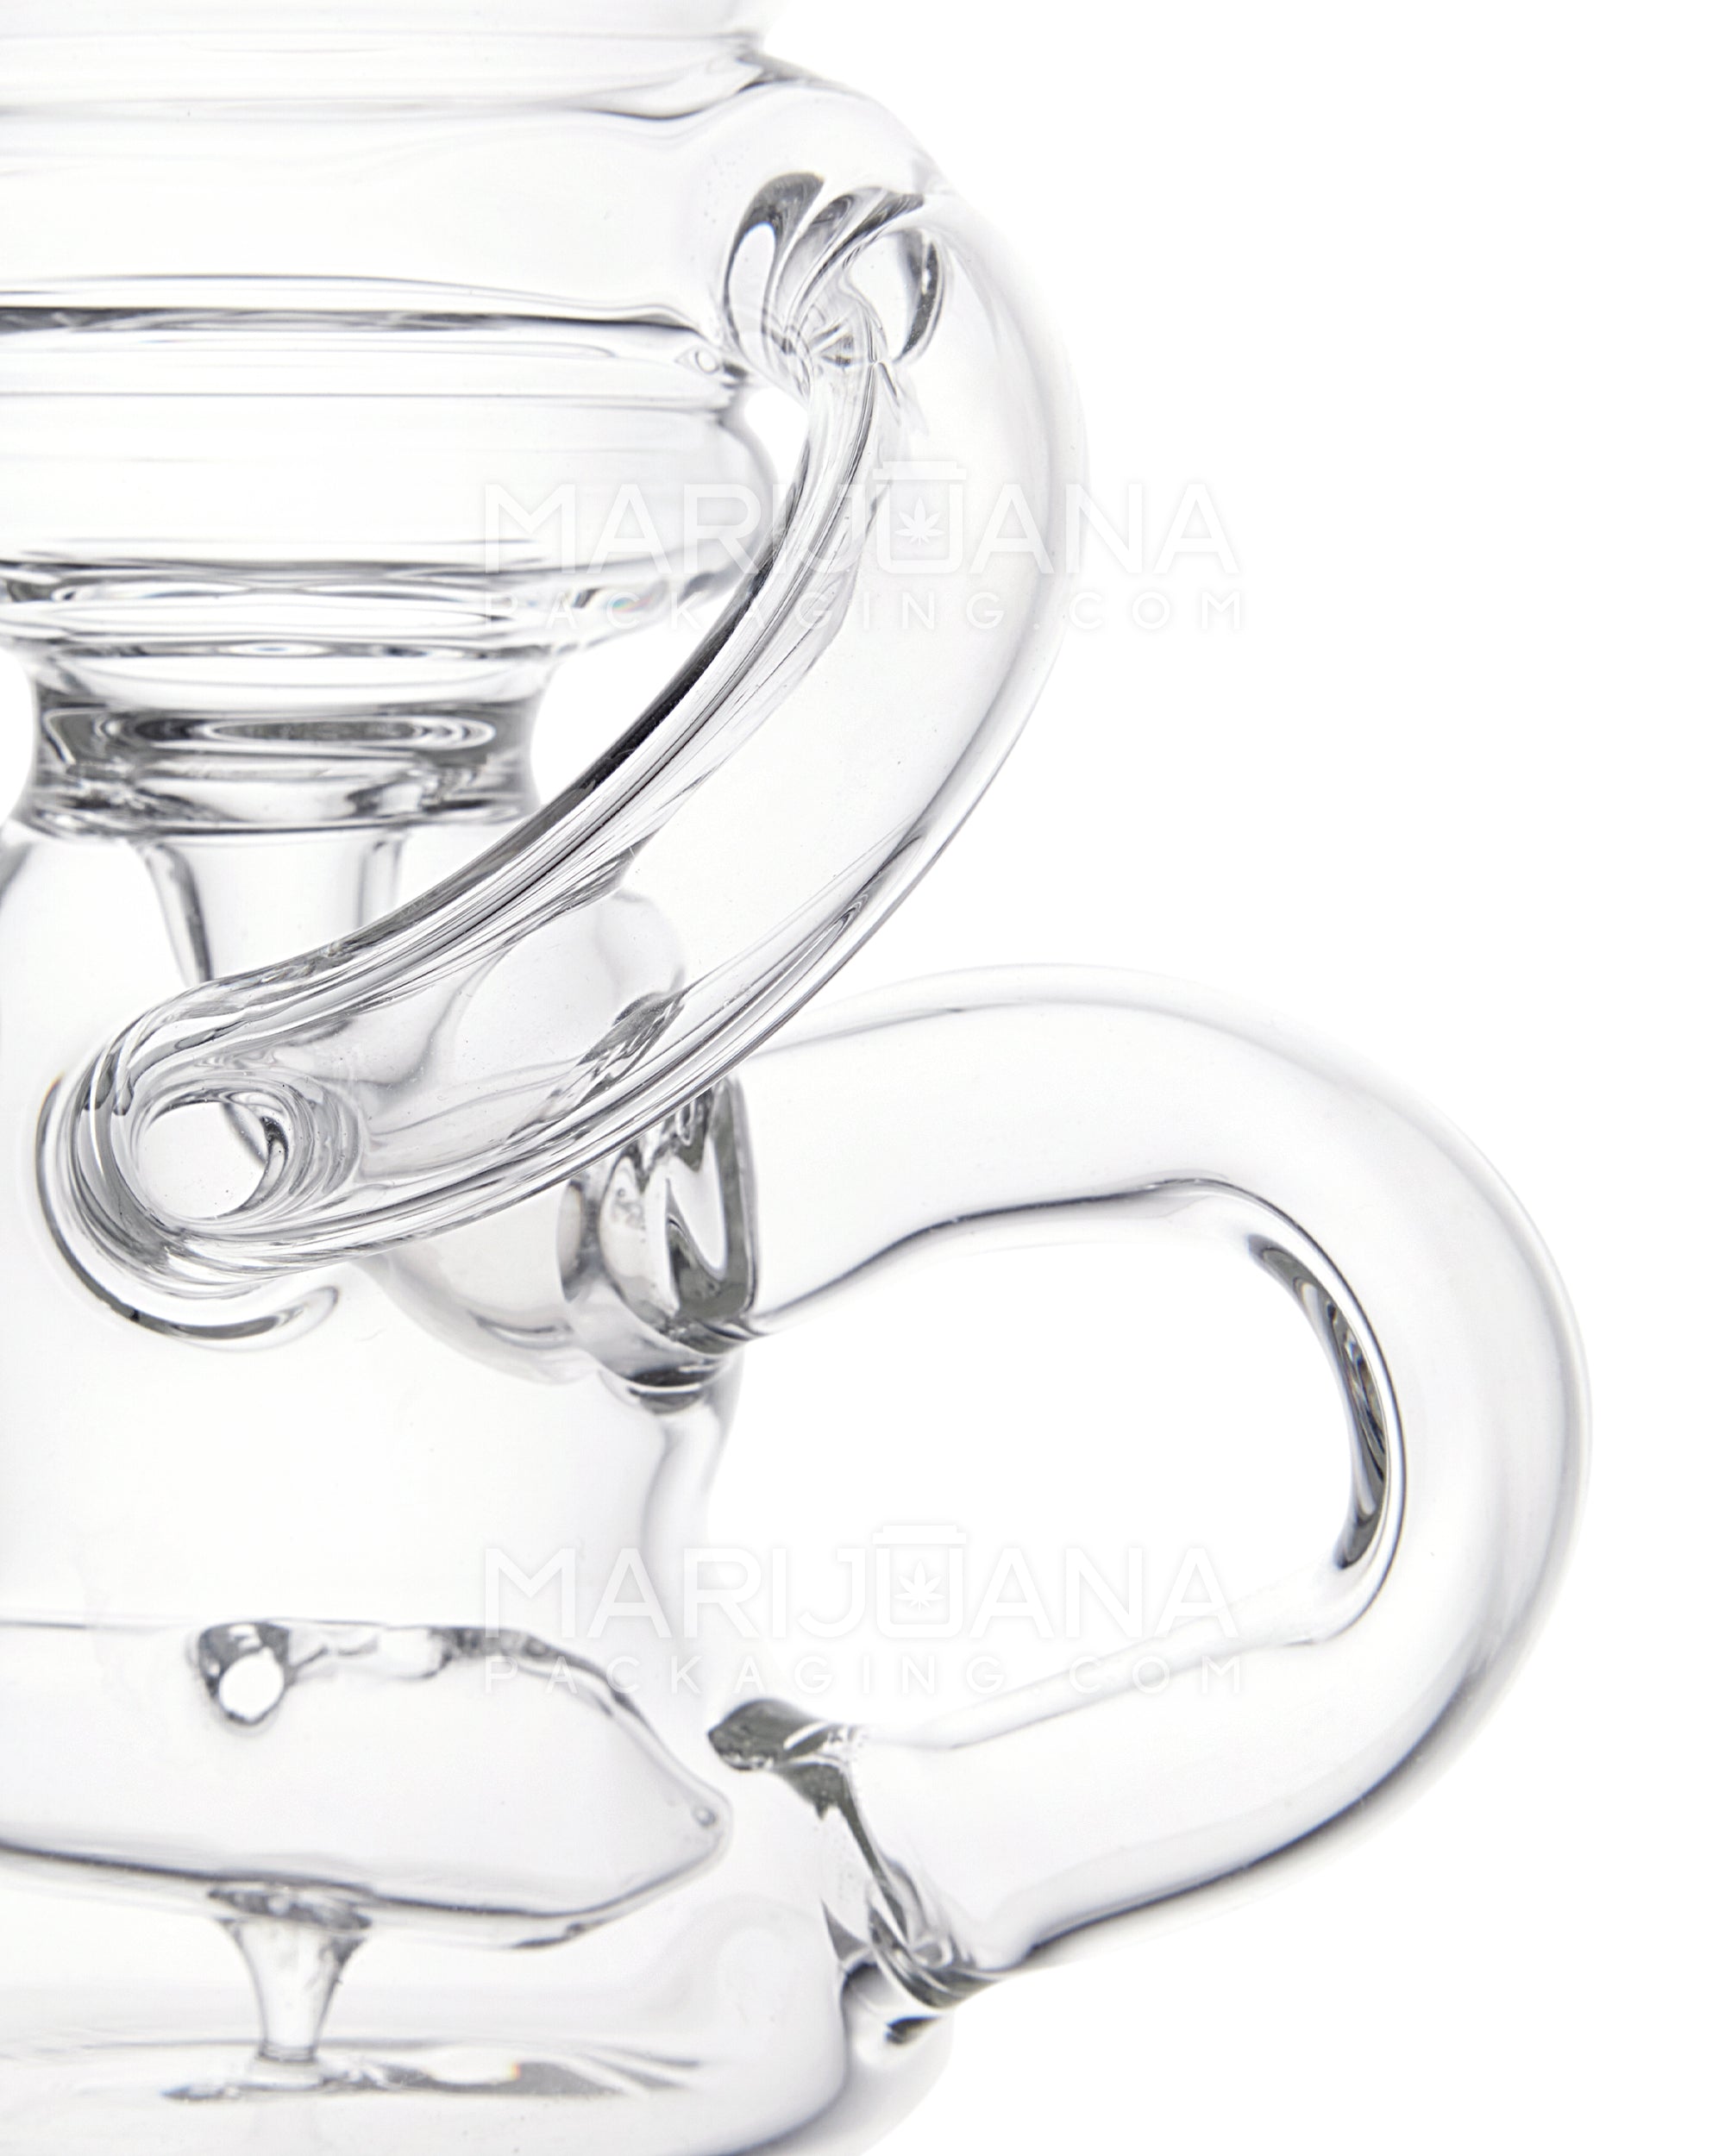 USA Glass | Bent Neck Mini Recycler Water Pipe w/ Inline Perc | 6.5in Tall - 14mm Bowl - Smoke